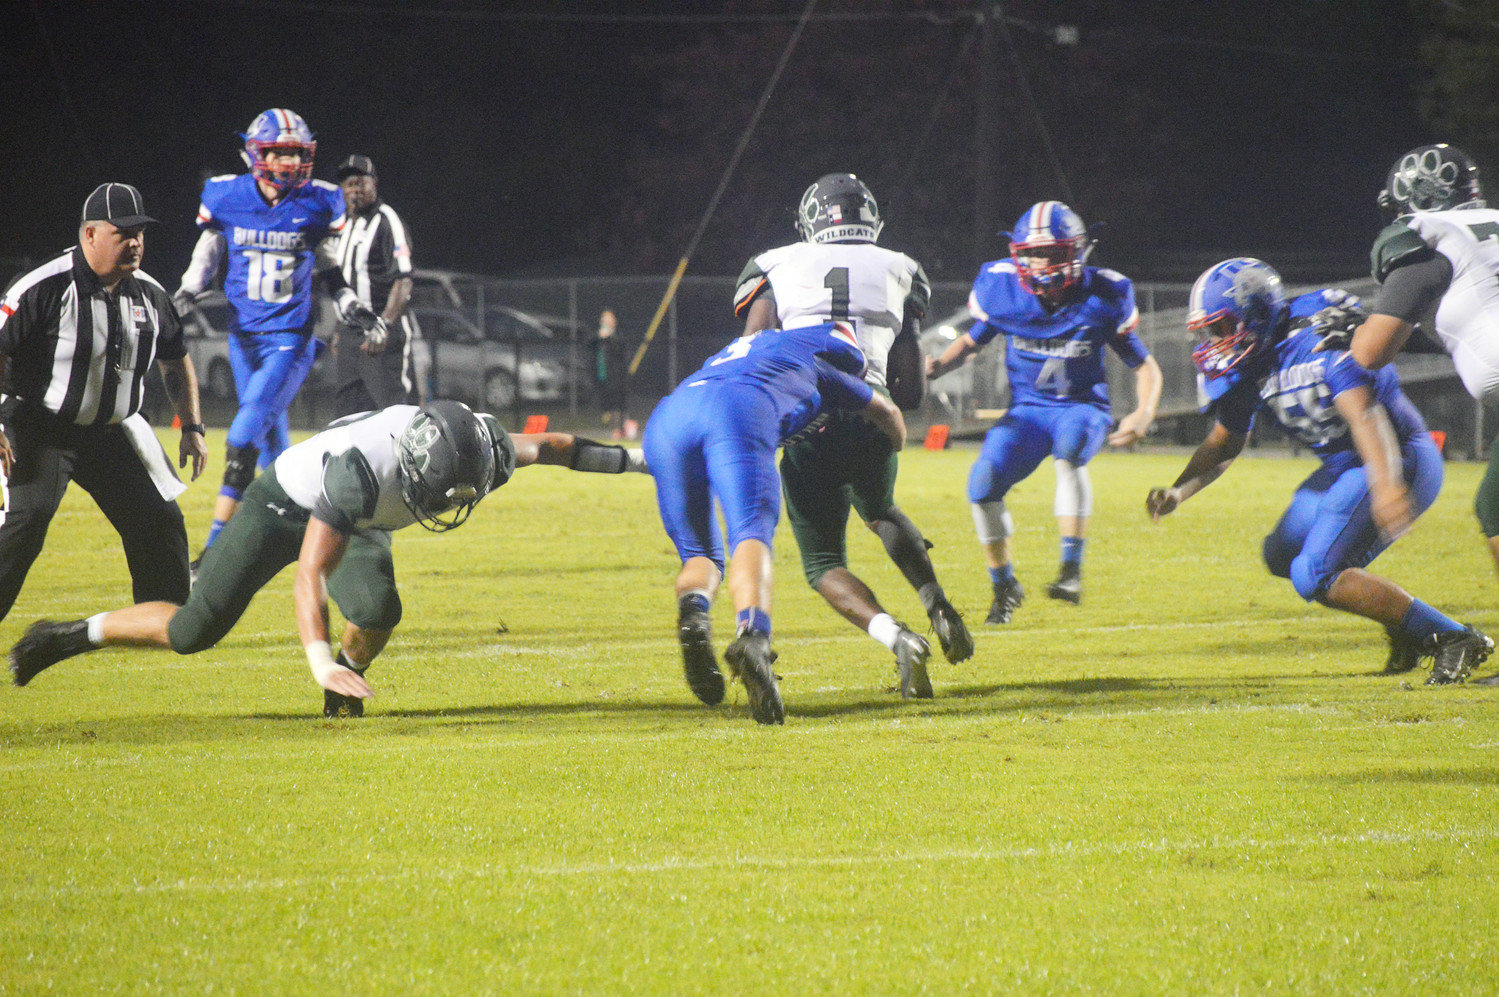 Quitman’s River Chaney (3) brings down Scurry-Rosser’s Marquis Majors (1) in Friday’s contest prior to the game being called because of lightning in the area.